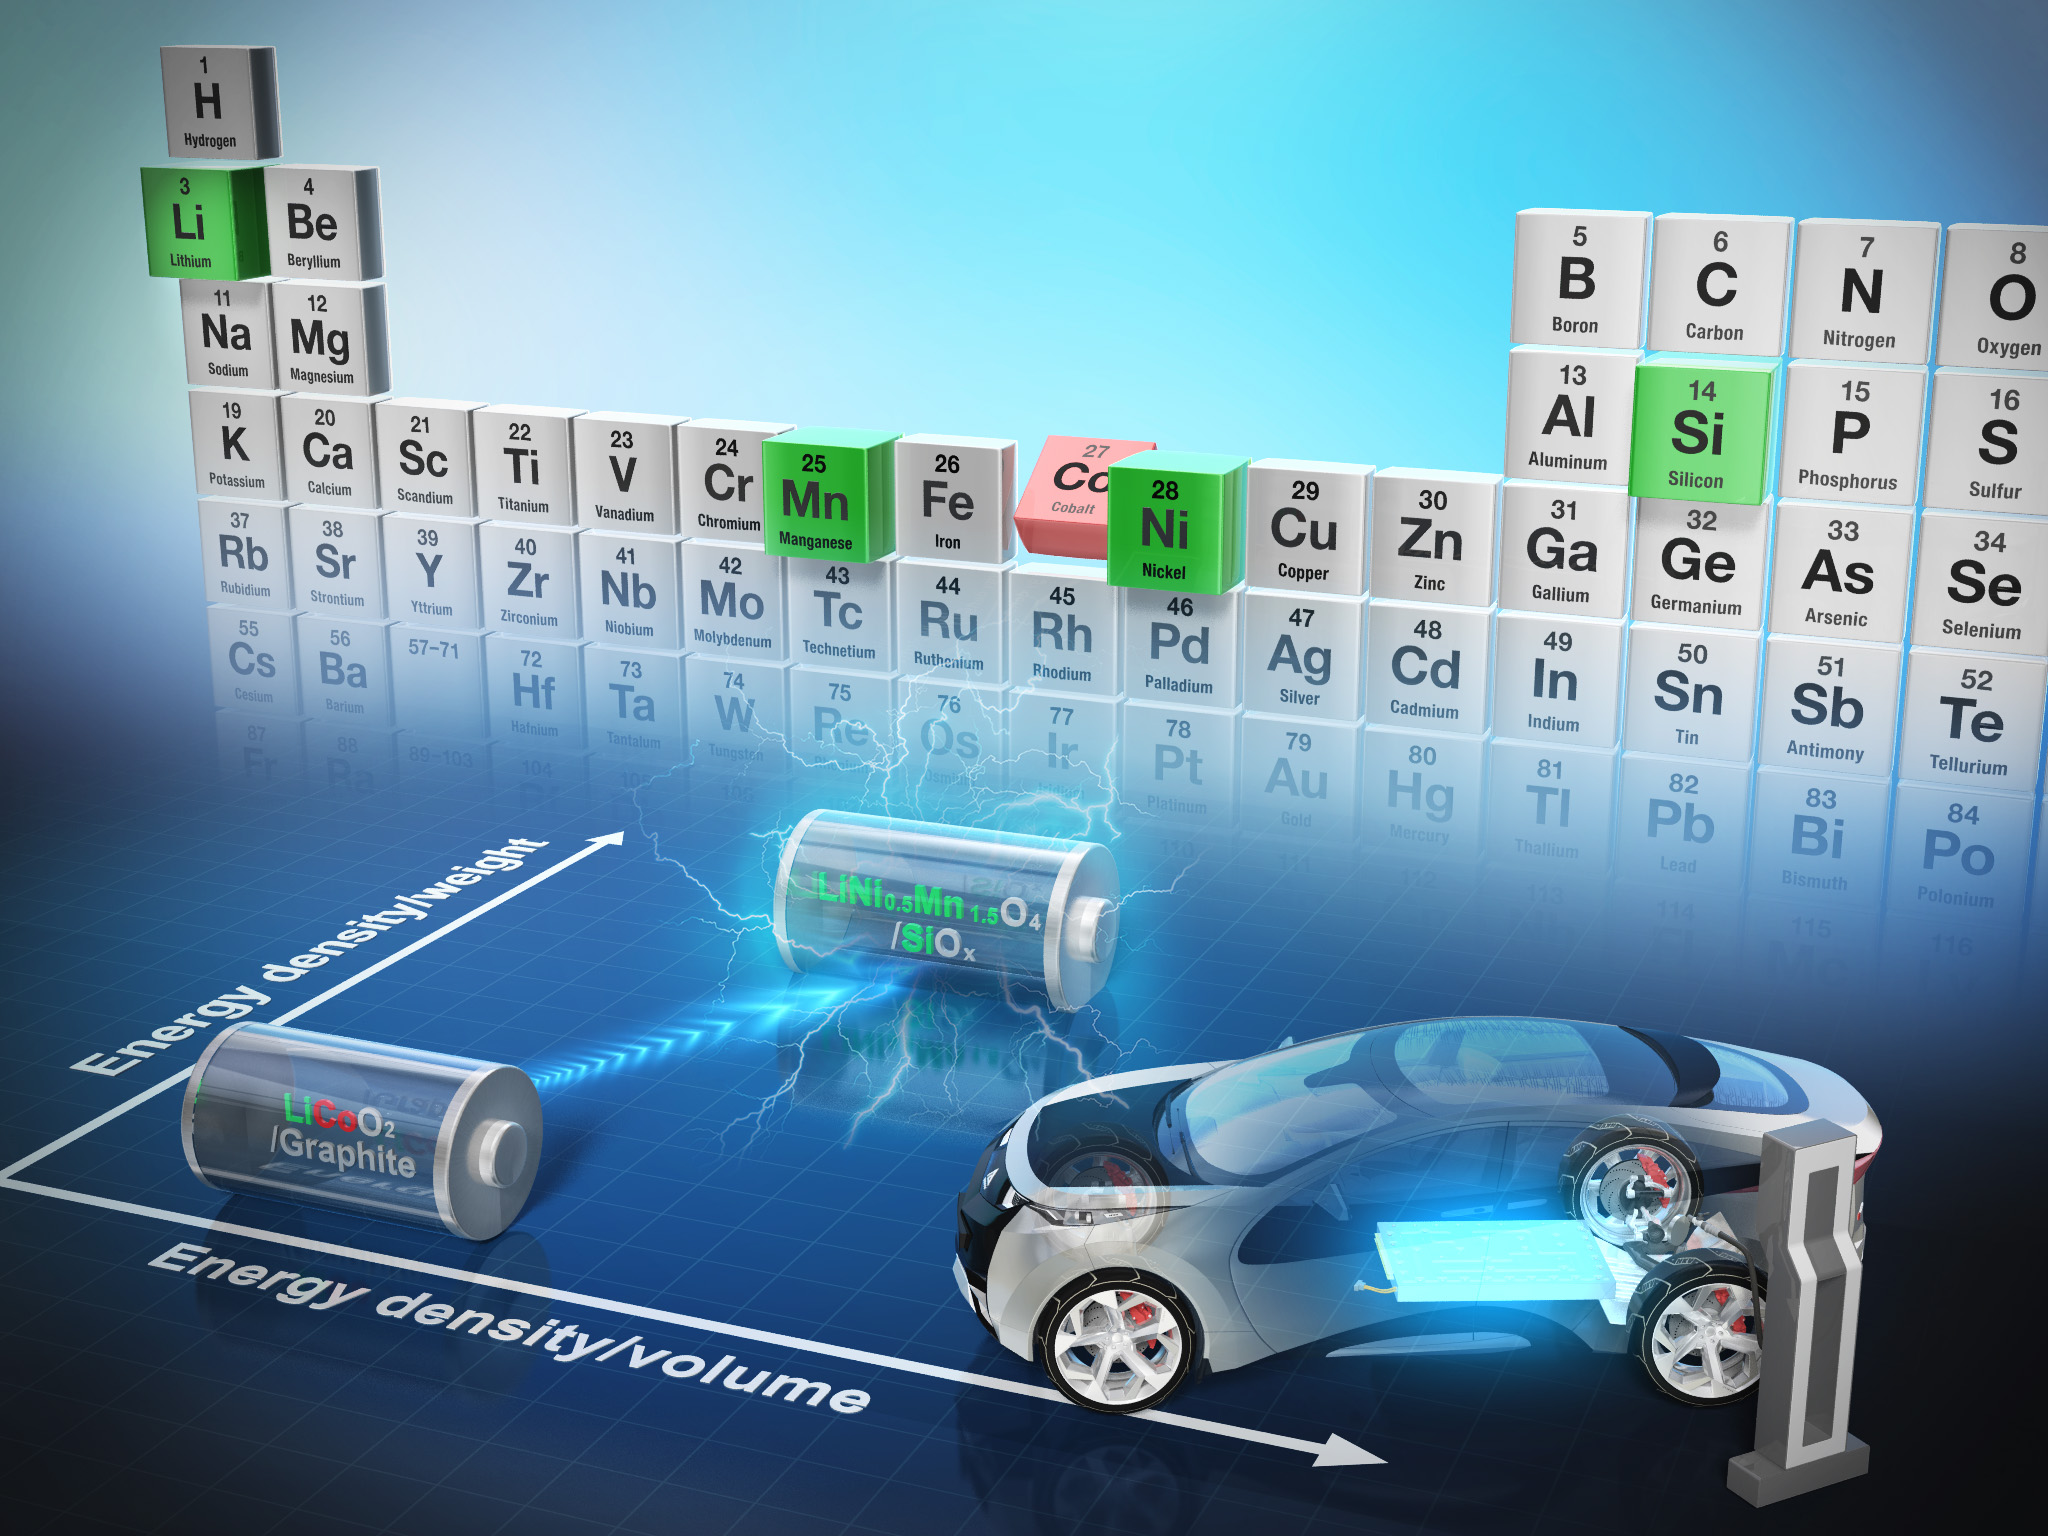 A car and some batteries in front of a periodic table of elements on a blue background.